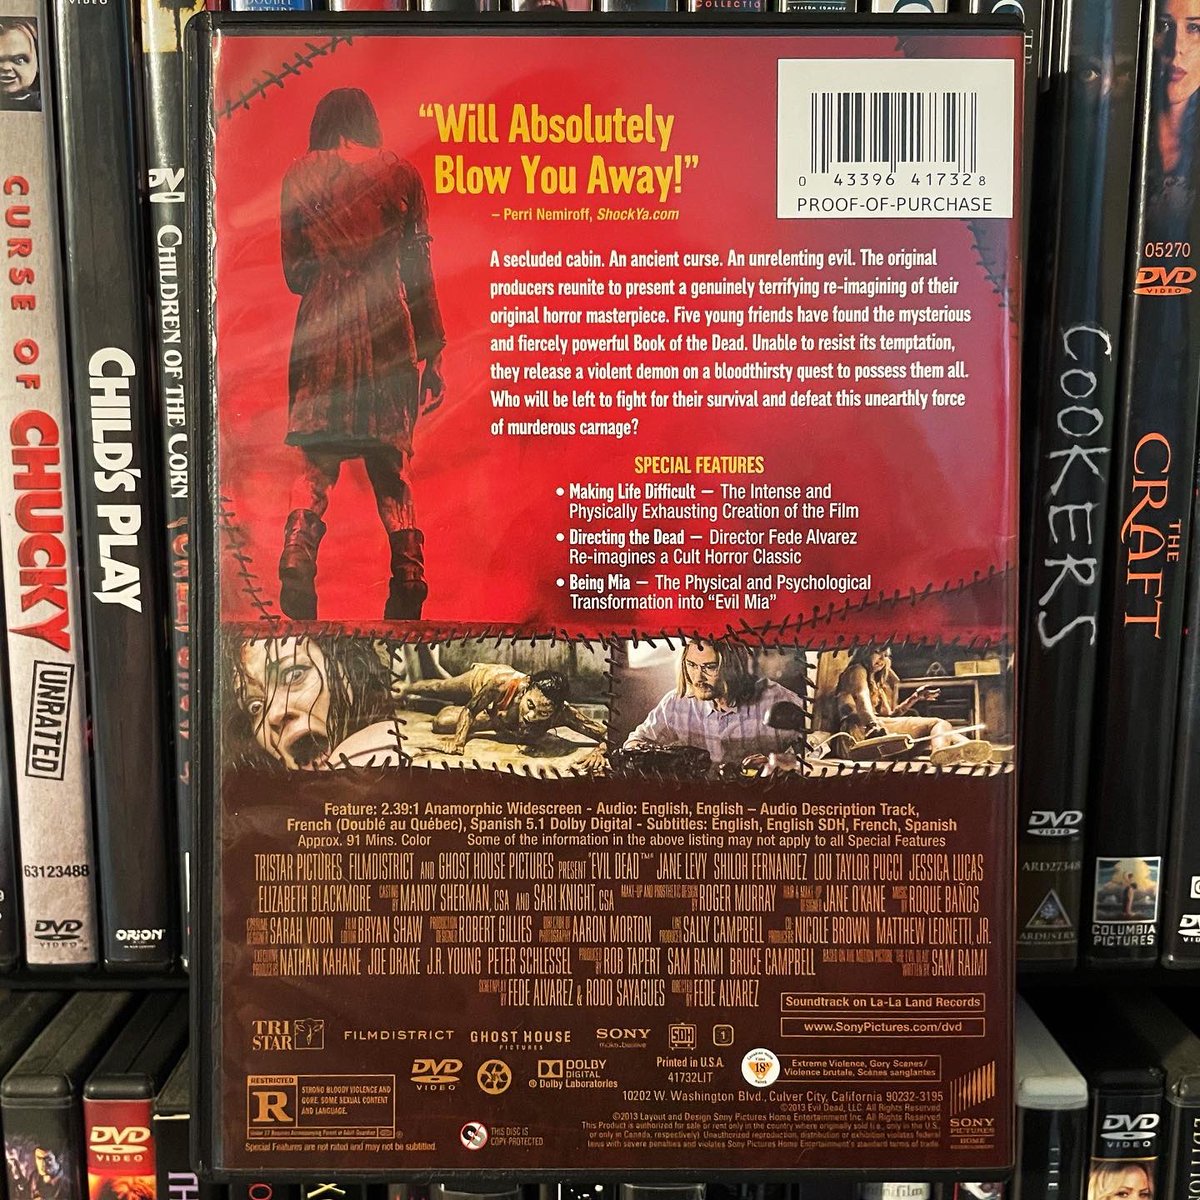 “This time, the only fucking way is the hard way”
#evildead #2013movie #2010scinema #horrormovie #fedealvarez #brucecampbell #samraimi #janelevy #shilohfernandez #jessicalucas #loutaylorpucci #elizabethblackmore #dvd #horrordvd #dvdcover #dvdcollection #dvdcollector #deadmedia